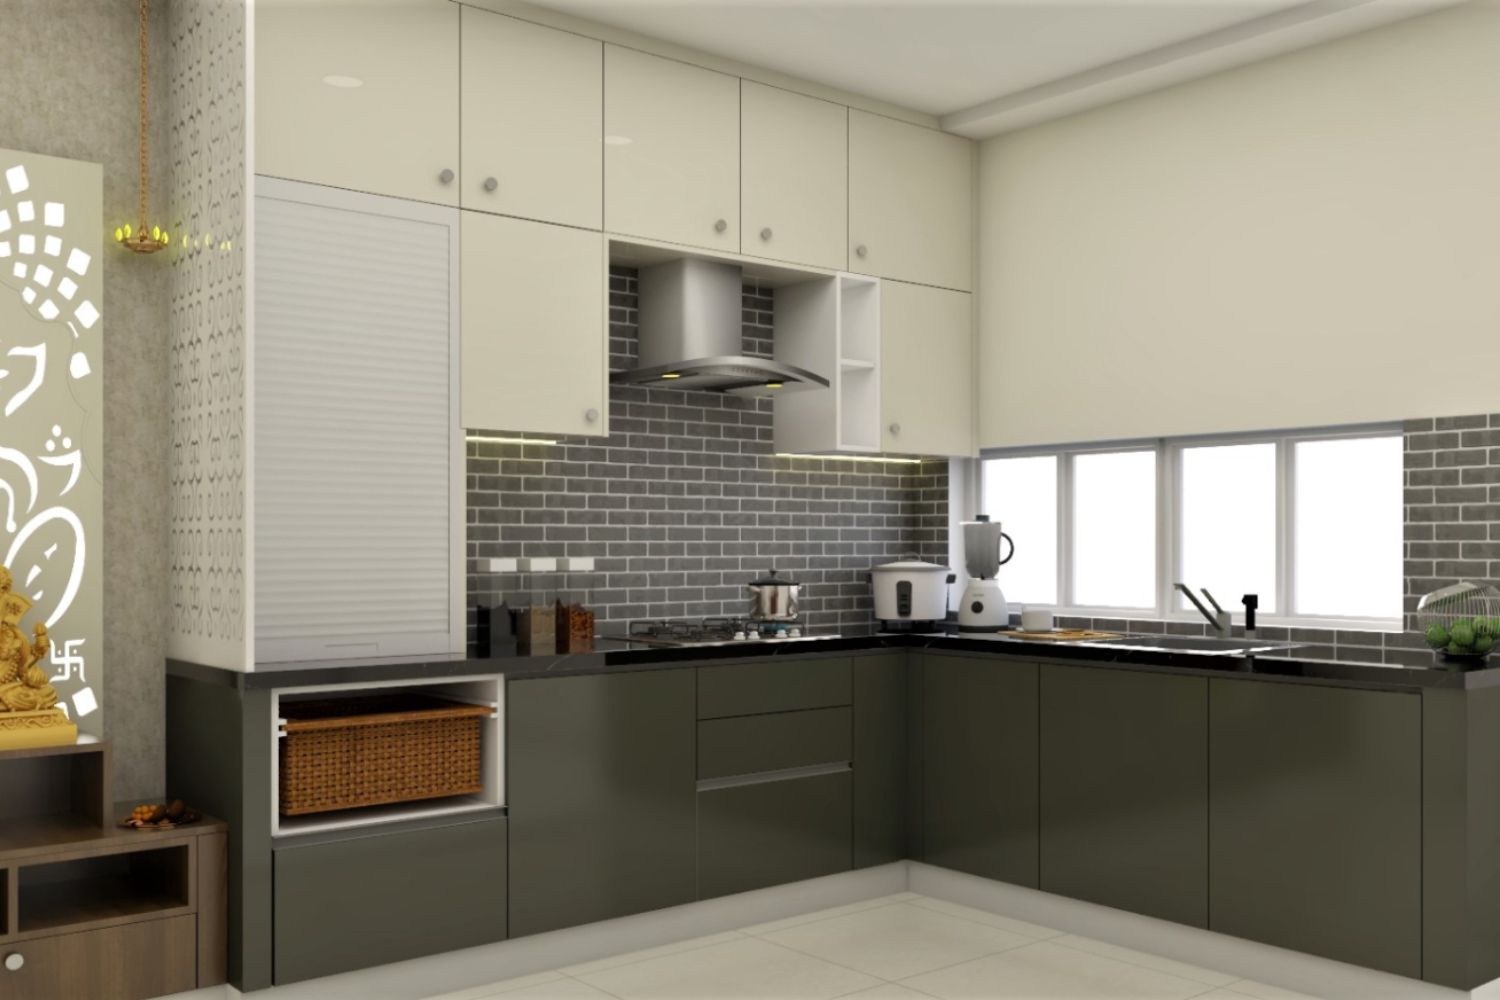 Contemporary L-Shaped Kitchen Design With Spacious Cabinets And A Wicker Basket